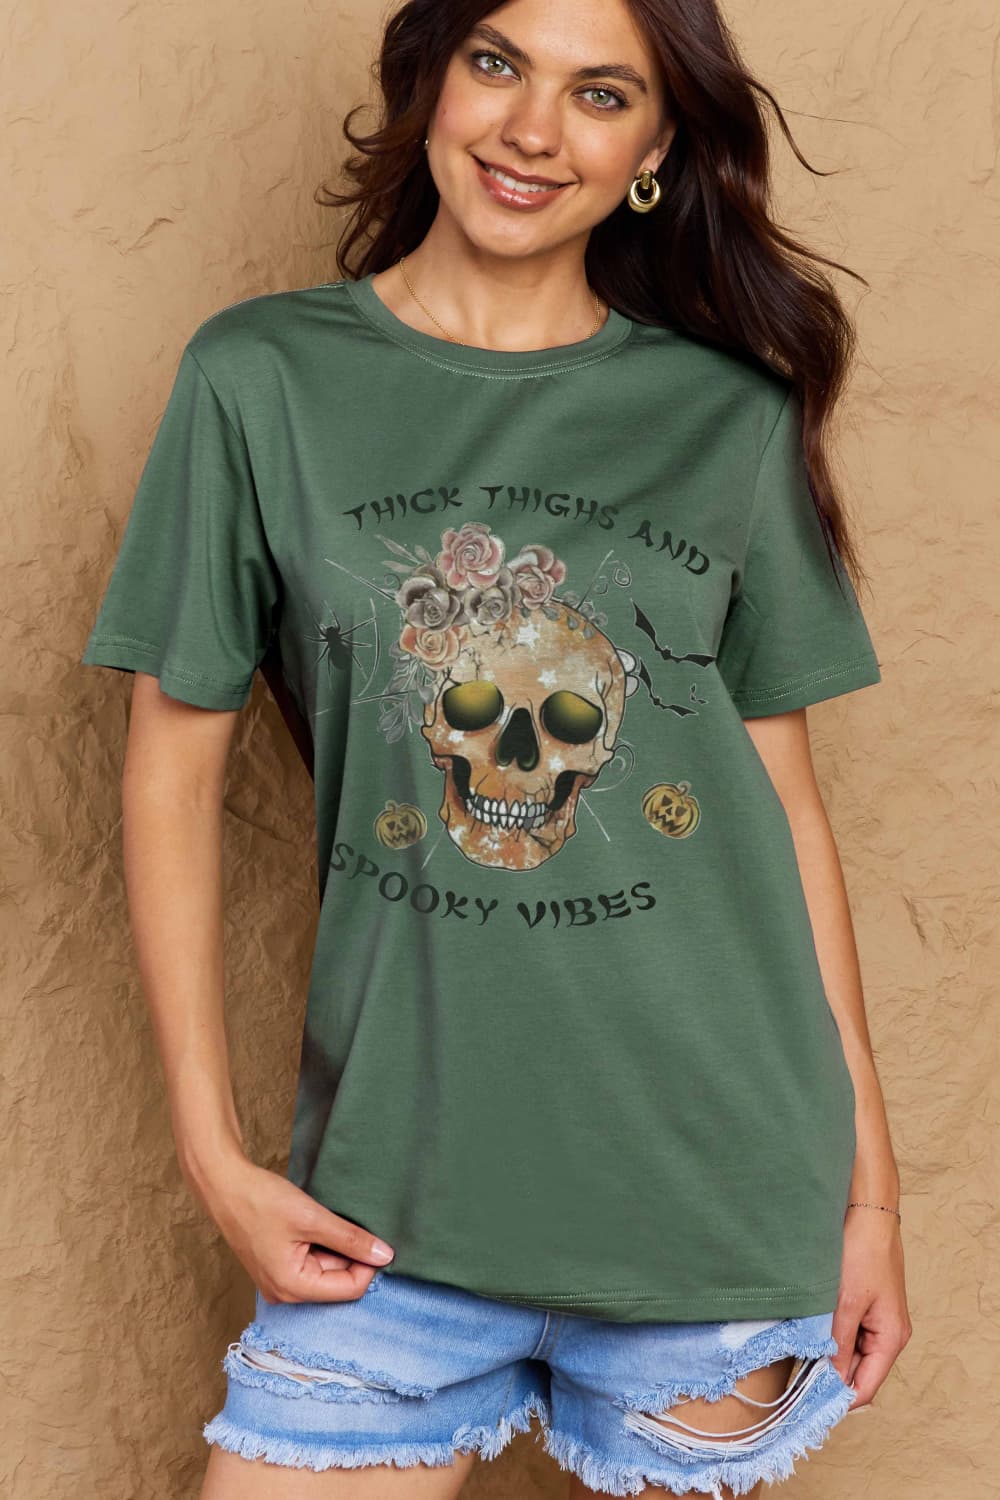 Simply Love THICK THIGHS AND SPOOKY VIBES Graphic Cotton T-Shirt - Online Only